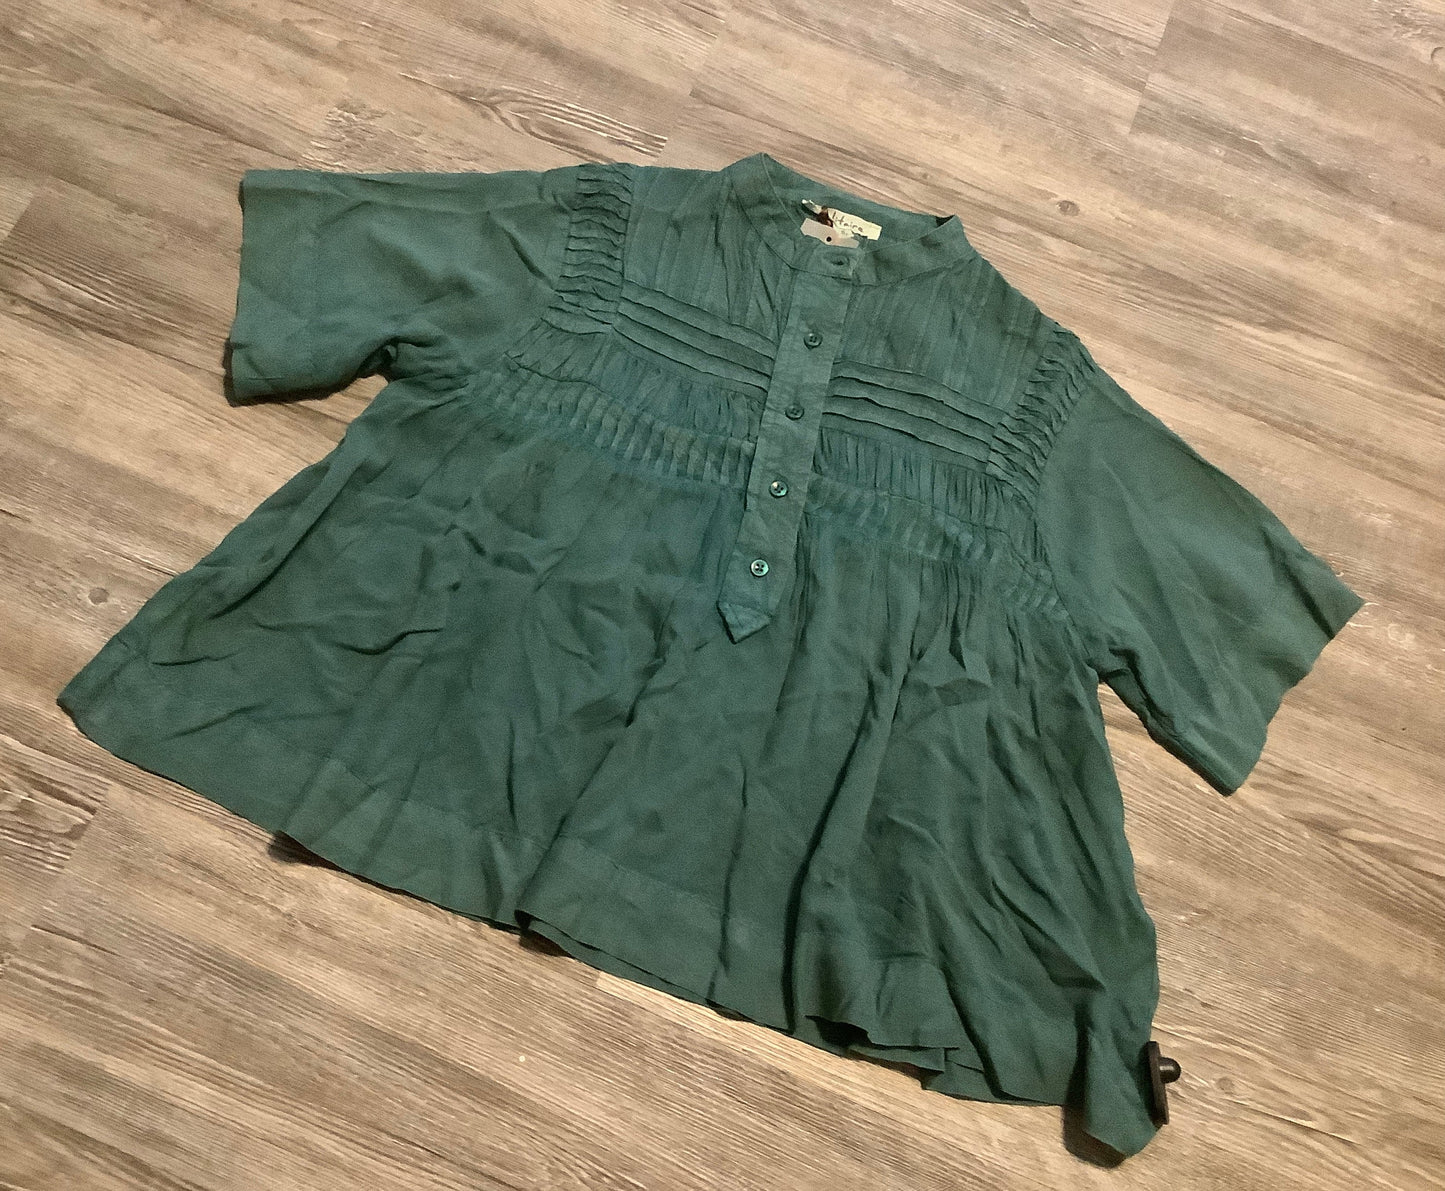 Green Top Short Sleeve Solitaire, Size S